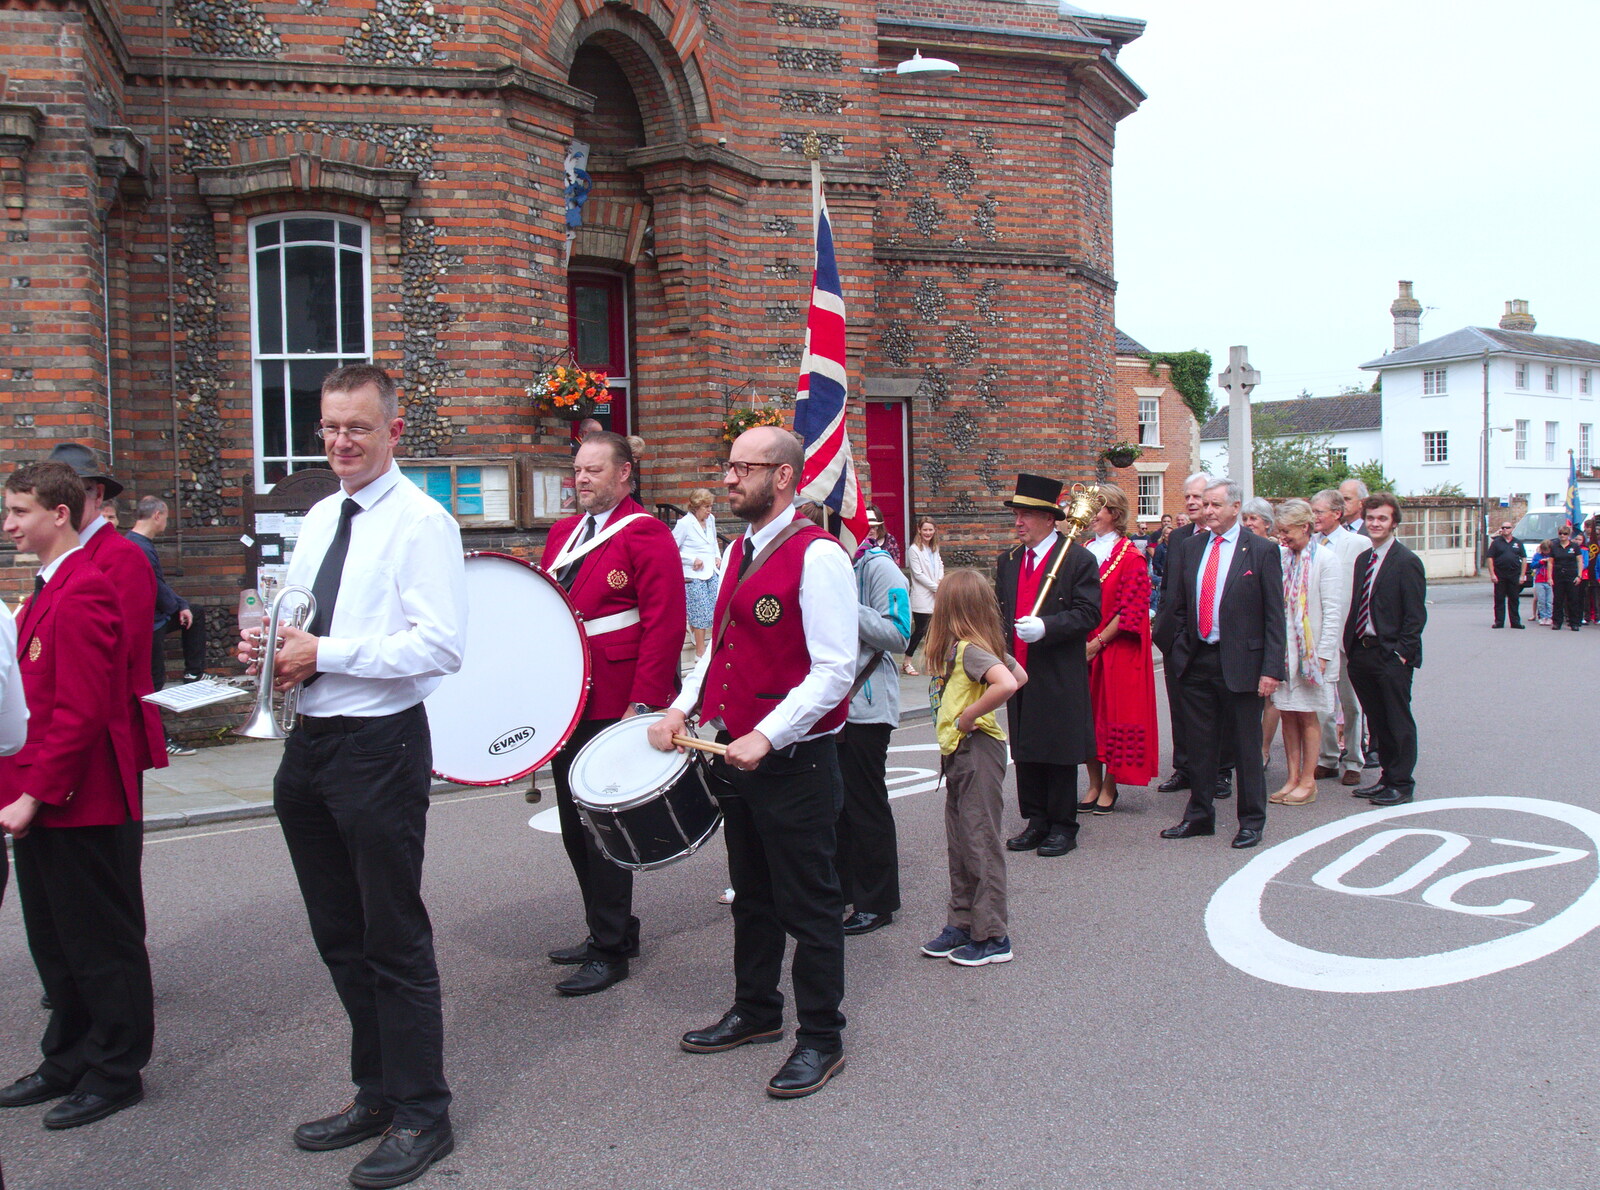 Nosher looks over, with cornet in hand from The BSCC at North Lopham, and the GSB Mayor's Parade, Eye, Suffolk - 23rd June 2019